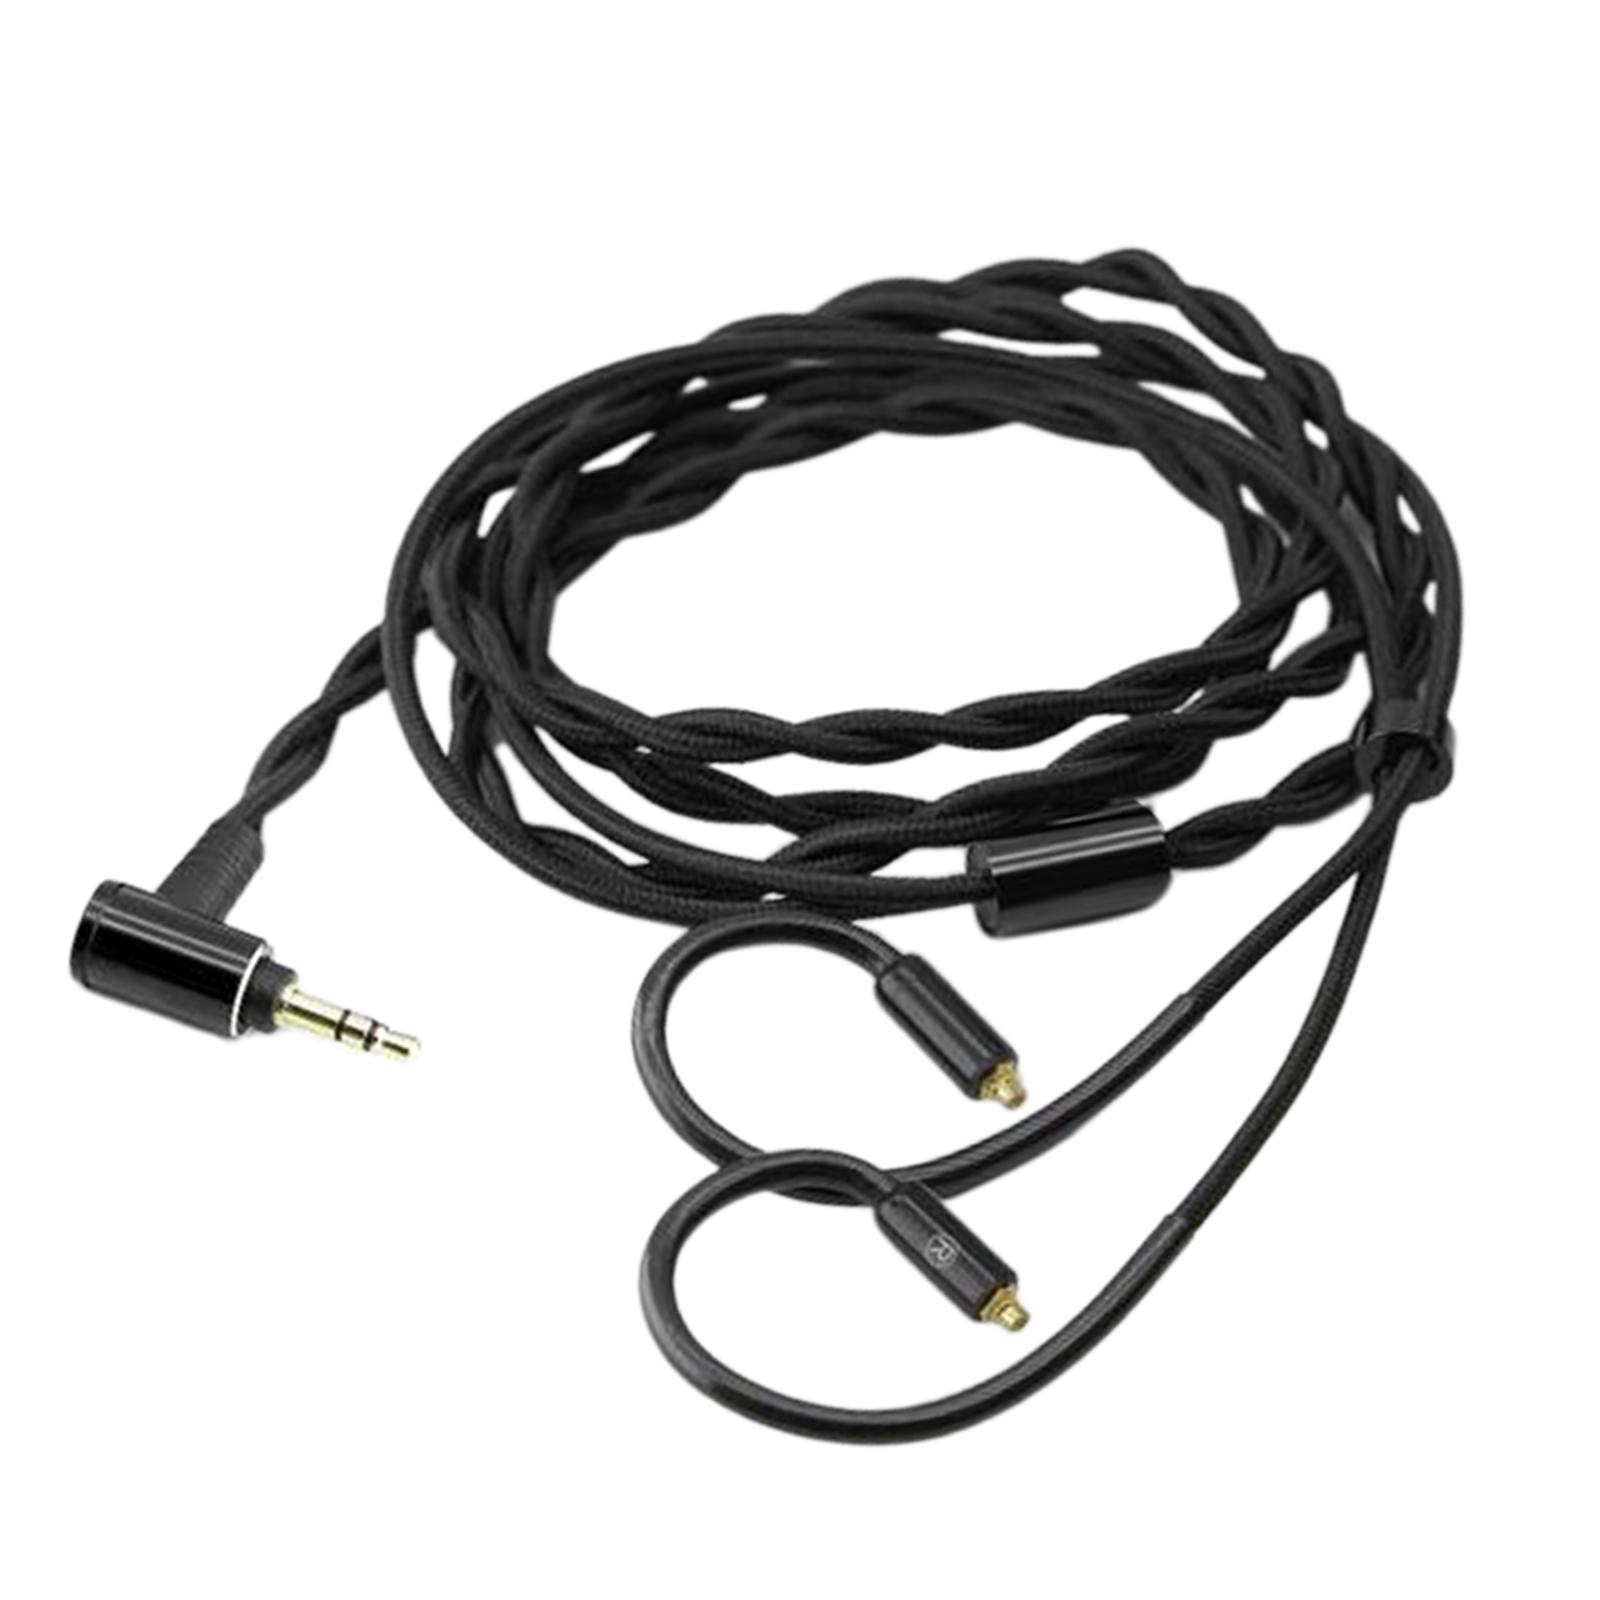 Mmcx Earphone Upgrade Cable Accessories for SE215 3.5mm Standard Plug